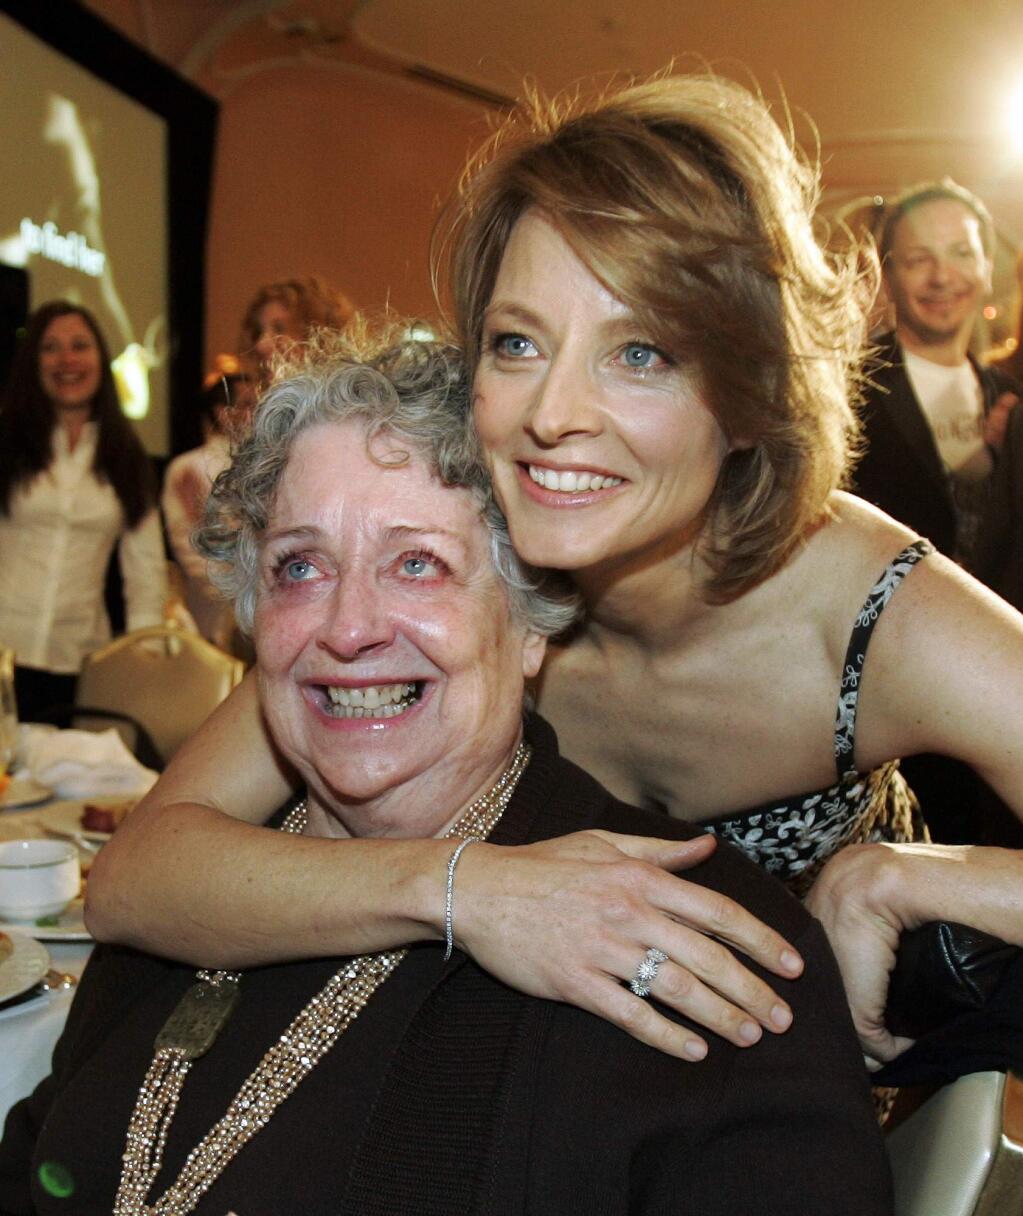 FILE - This Dec. 4, 2007 file photo shows actress-director Jodie Foster, right, with her mother Evelyn Foster after she received the Sherry Lansing Leadership Award at during the 16th annual Women in Entertainment breakfast in Beverly Hills, Calif. Evelyn “Brandy” Foster, who managed her daughter Jodie's career from her child-prodigy years through two Academy Awards, died peacefully at her Los Angeles home of complications from dementia, Monday, May 13, 2019. She was 90. (AP Photo/Kevork Djansezian, File)